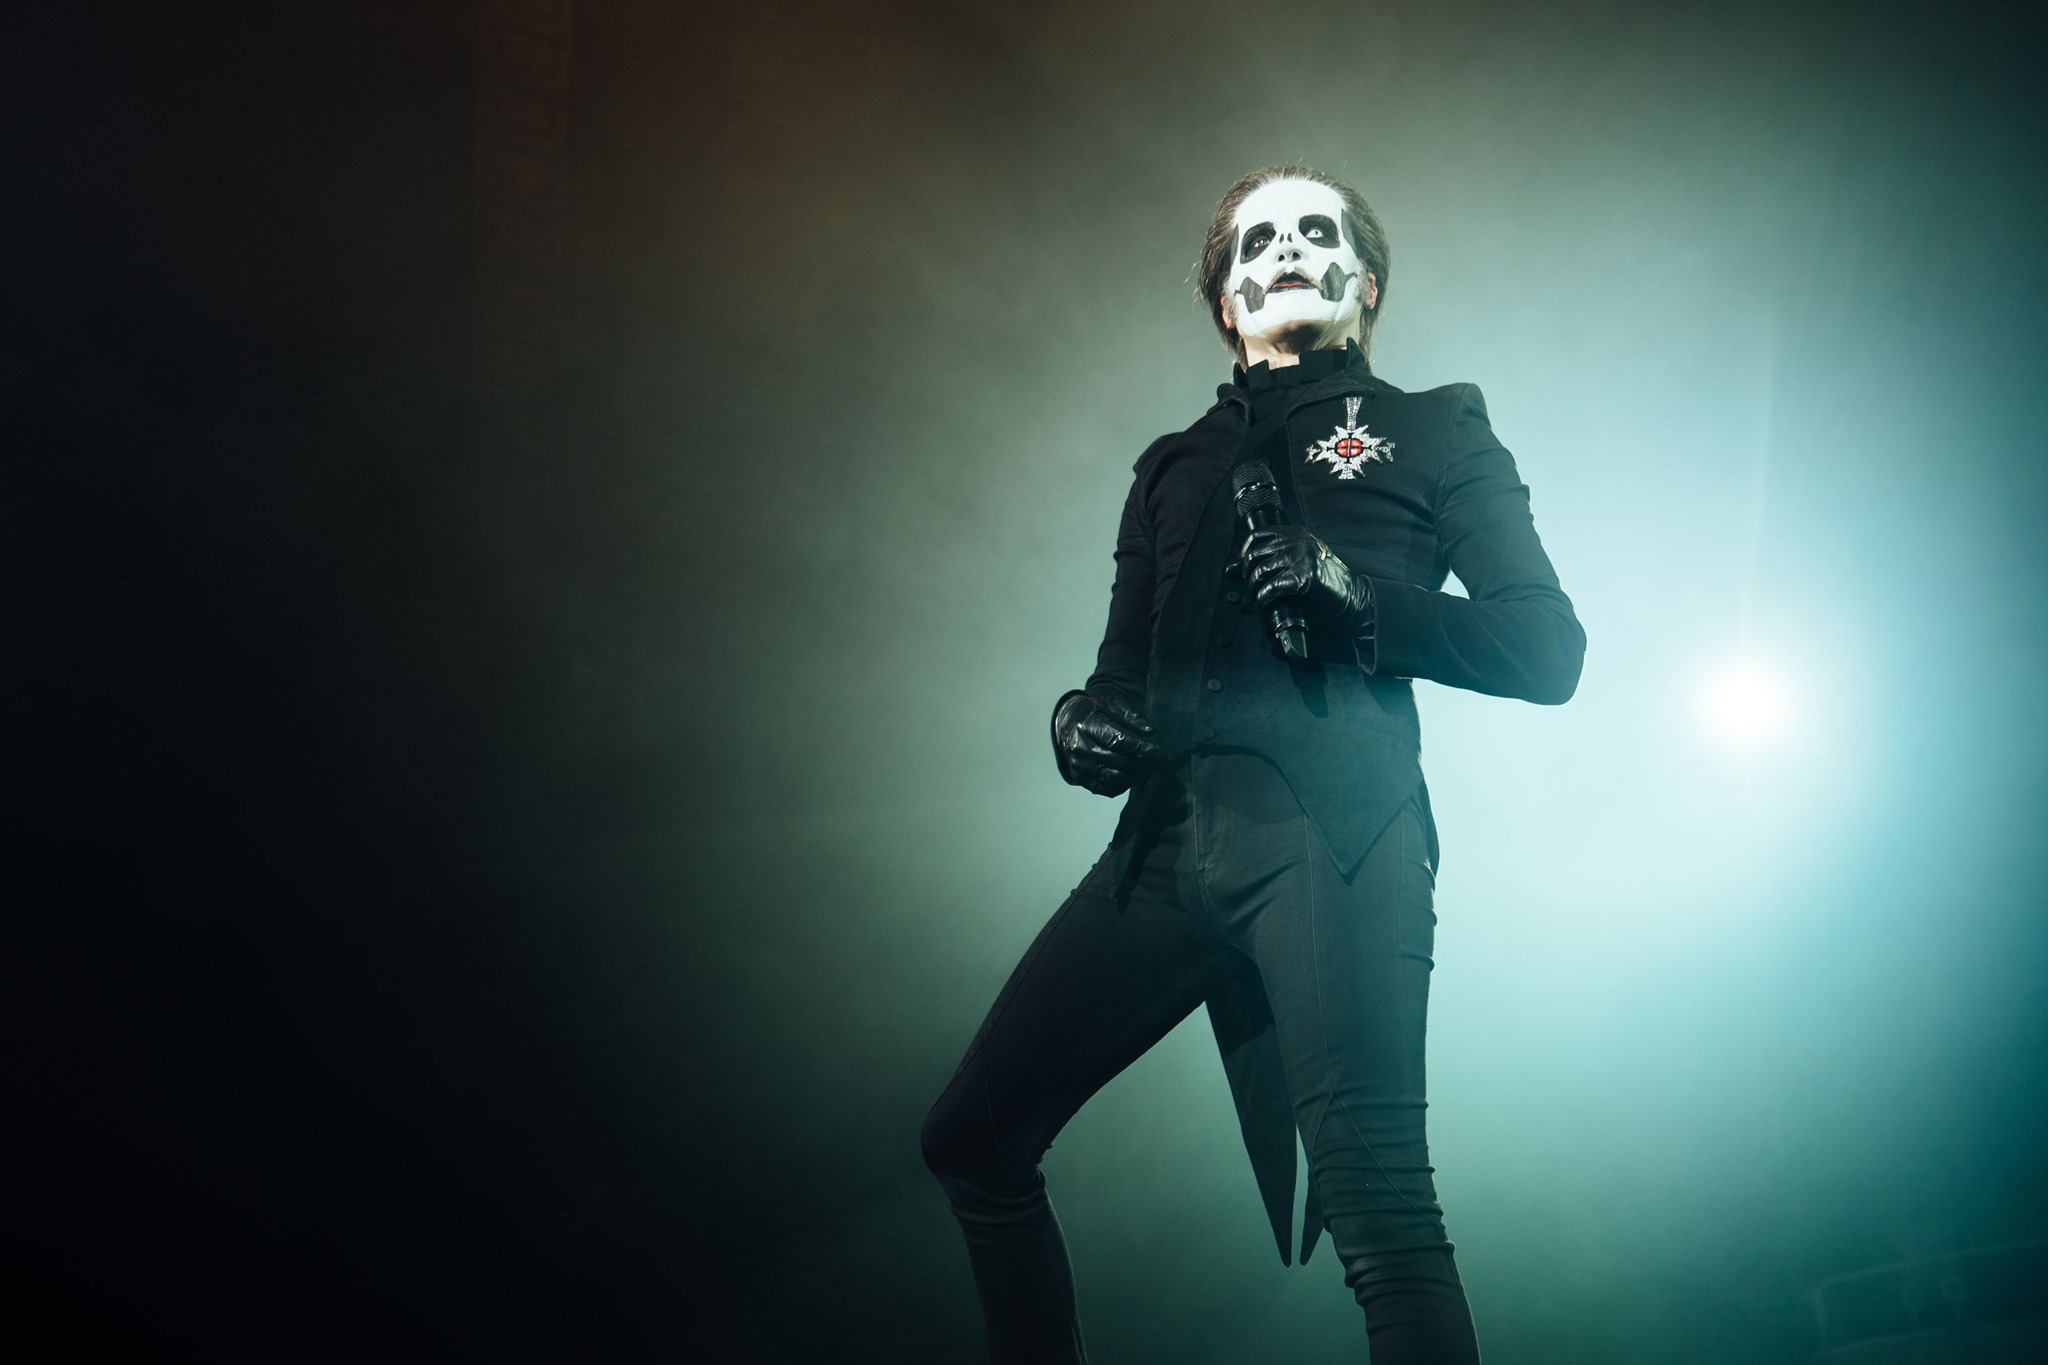 Ghost on the 'Tremendous' Honor of Grammy Nominations & Dropping